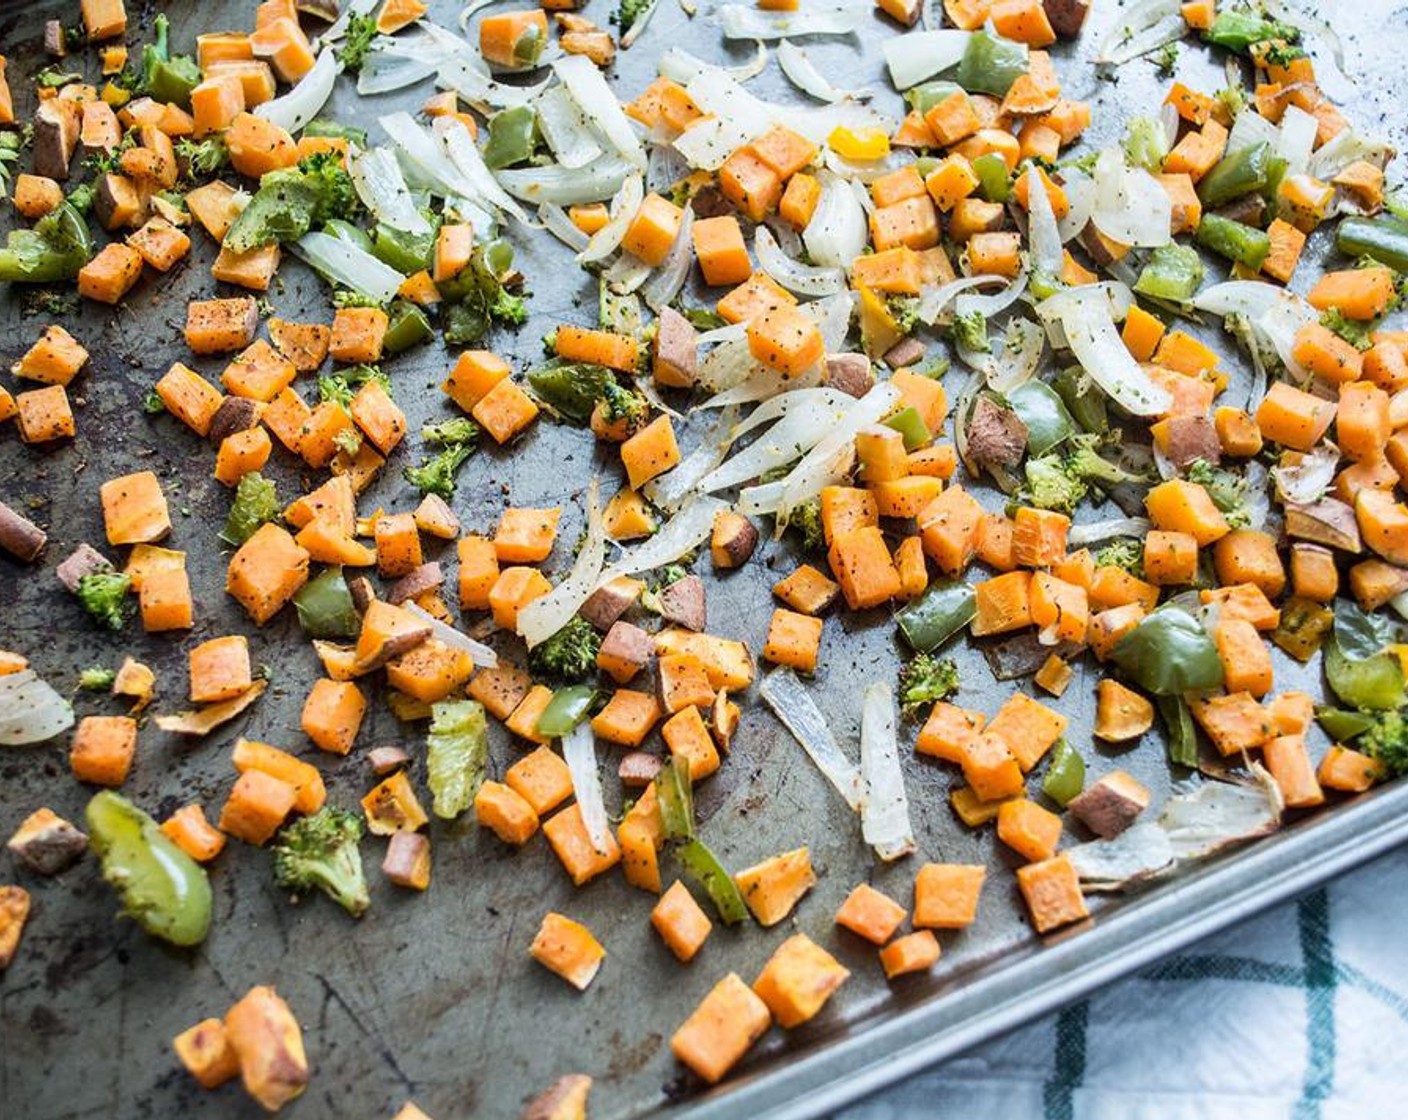 step 4 Lay veggies out in a single layer on the baking sheet and roast for 10 minutes.